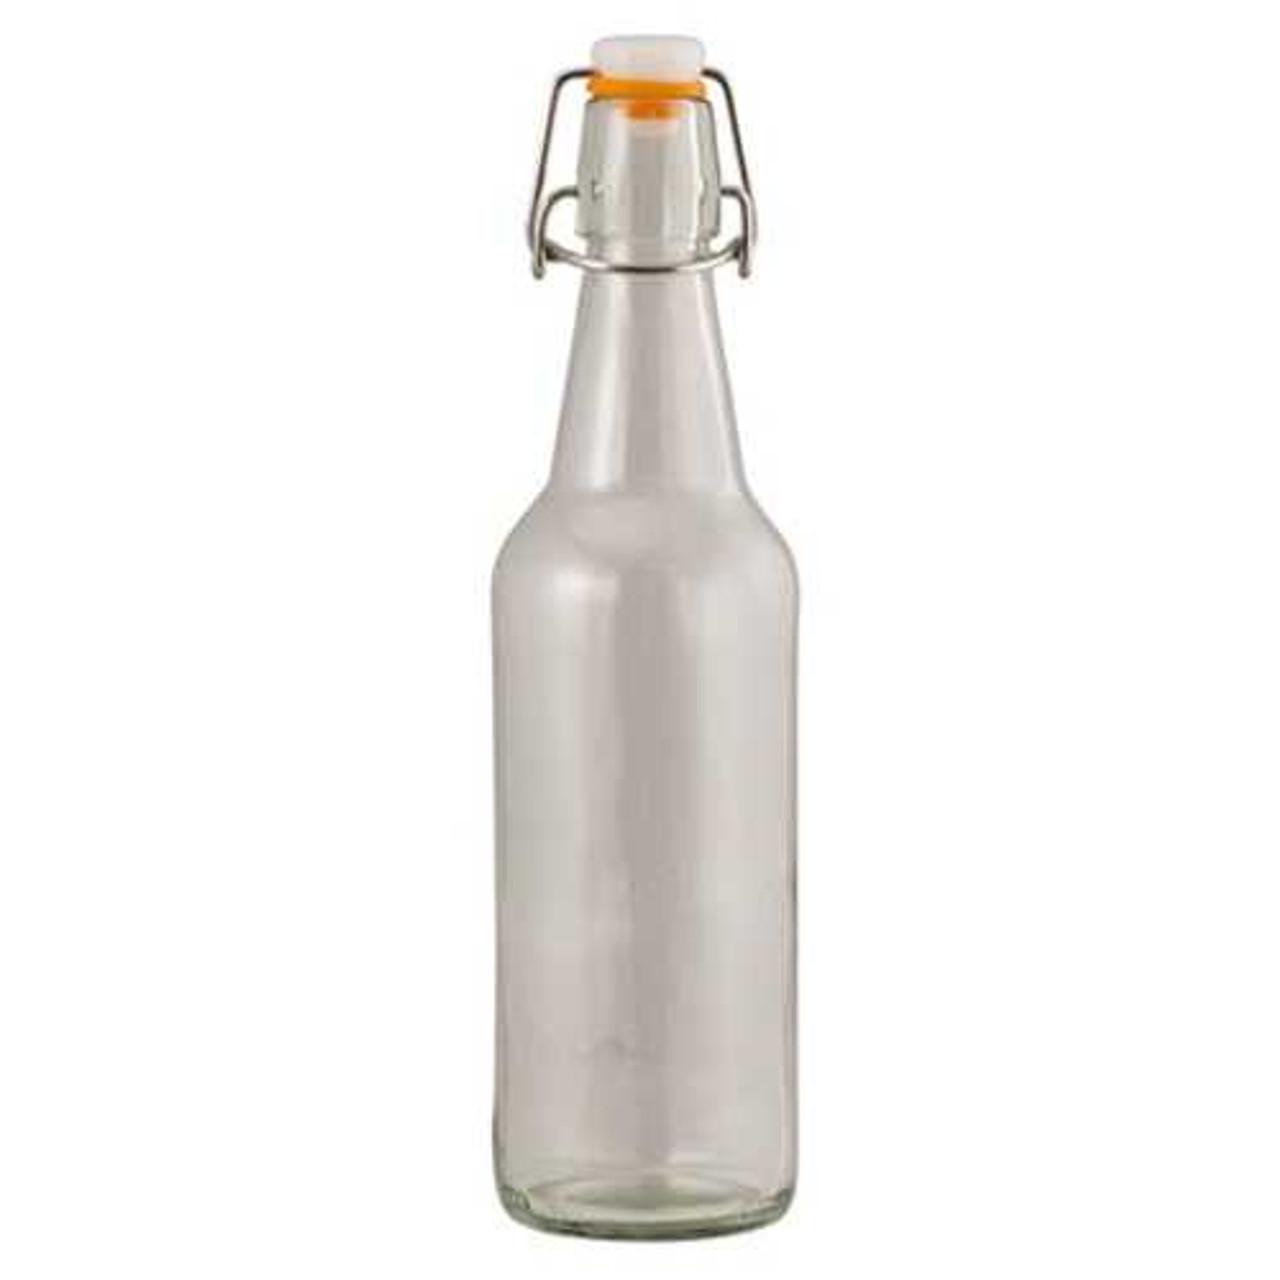 https://cdn11.bigcommerce.com/s-1ybtx/images/stencil/1280x1280/products/1274/6696/12-oz-Round-Clear-Glass-Bottle-with-Swing-Top-375-ml_4233__45618.1699989094.jpg?c=2